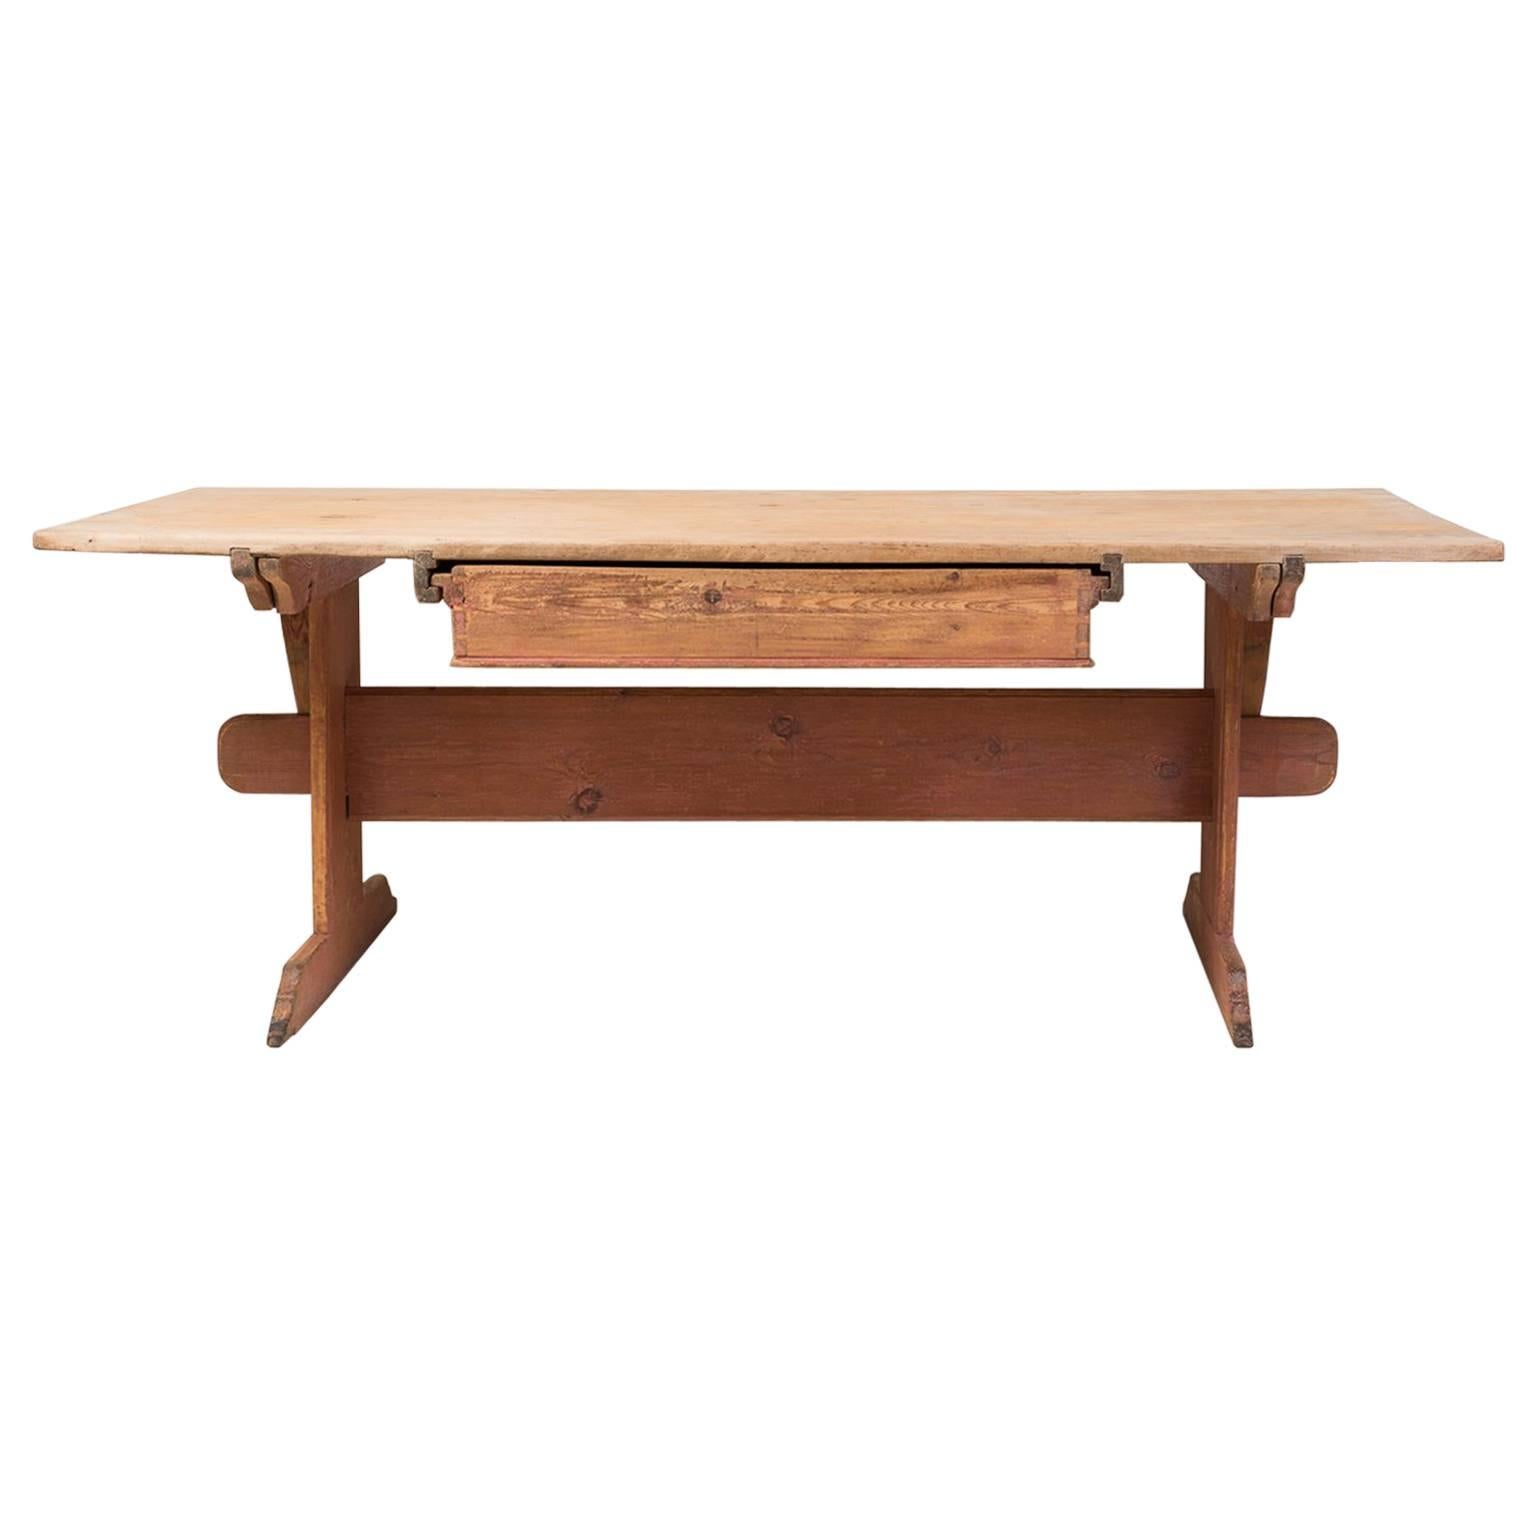 Swedish Farm House Table from the 1800s with Original Patina